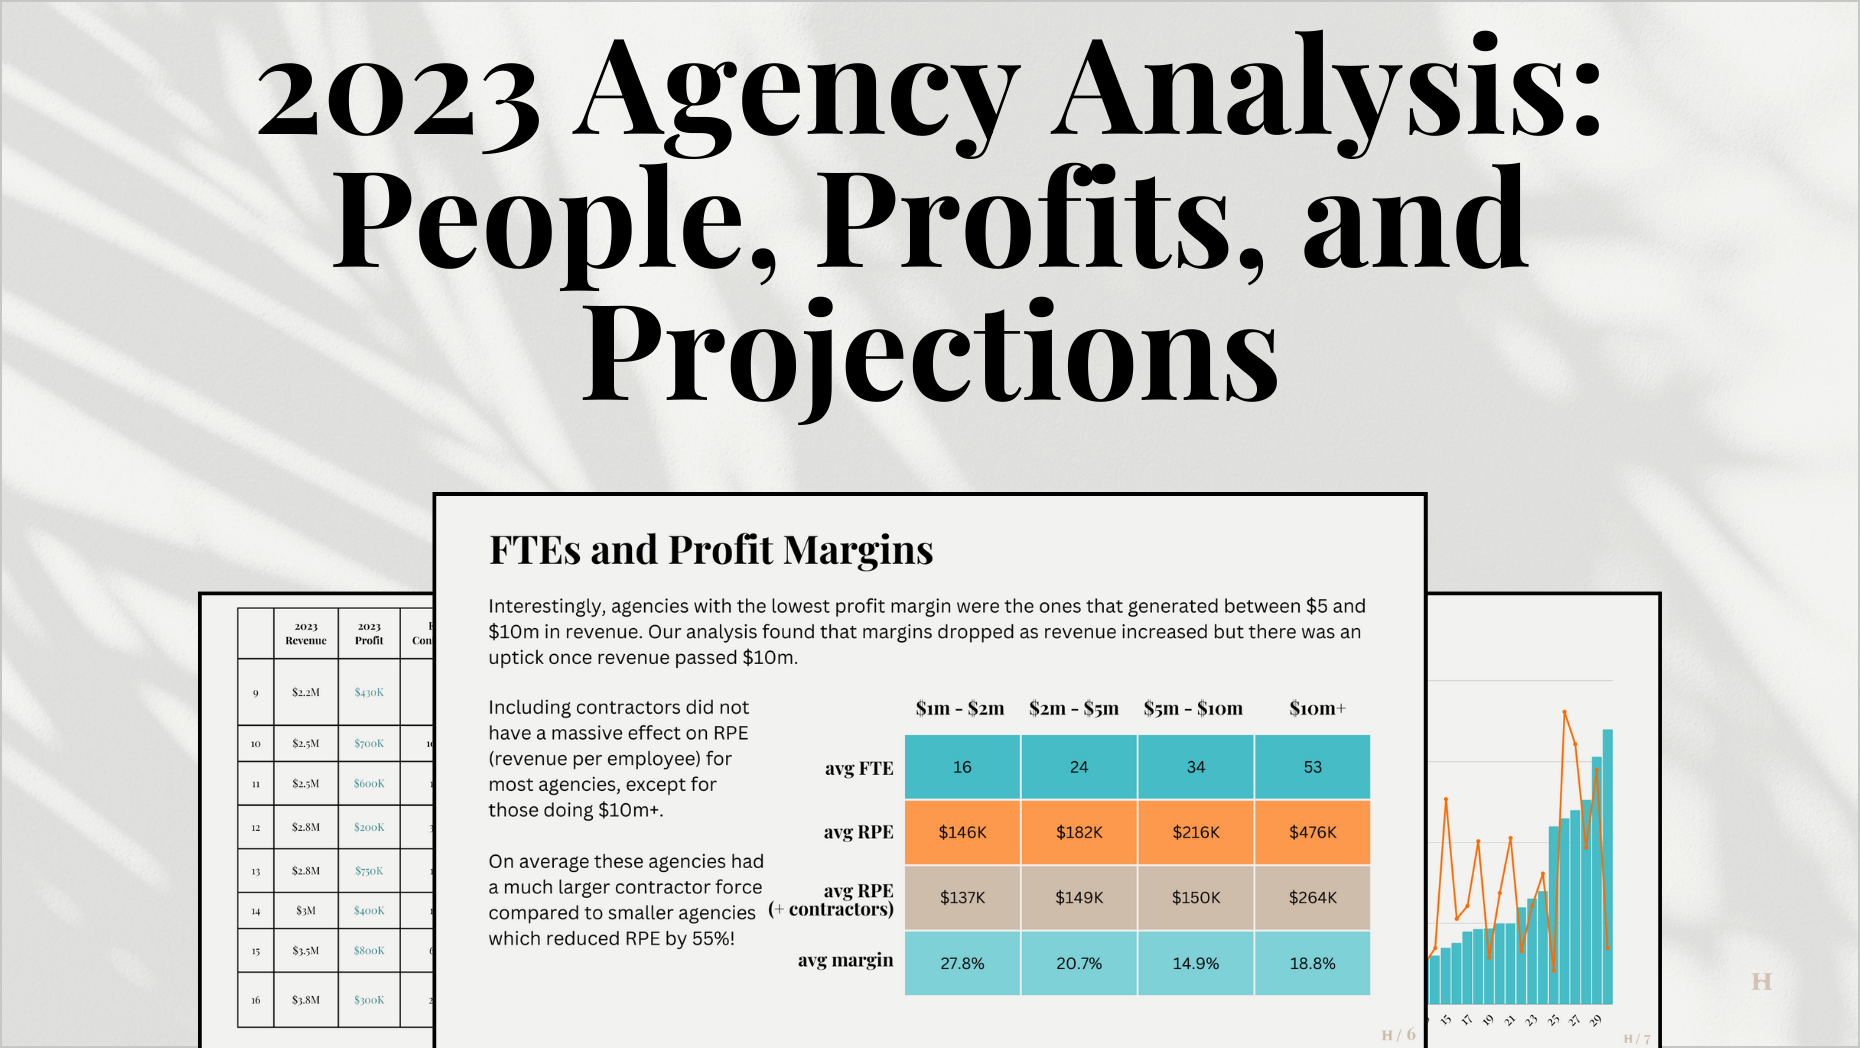 [Landing Page] 2023 Agency Analysis Profits, People, and Projections (1)